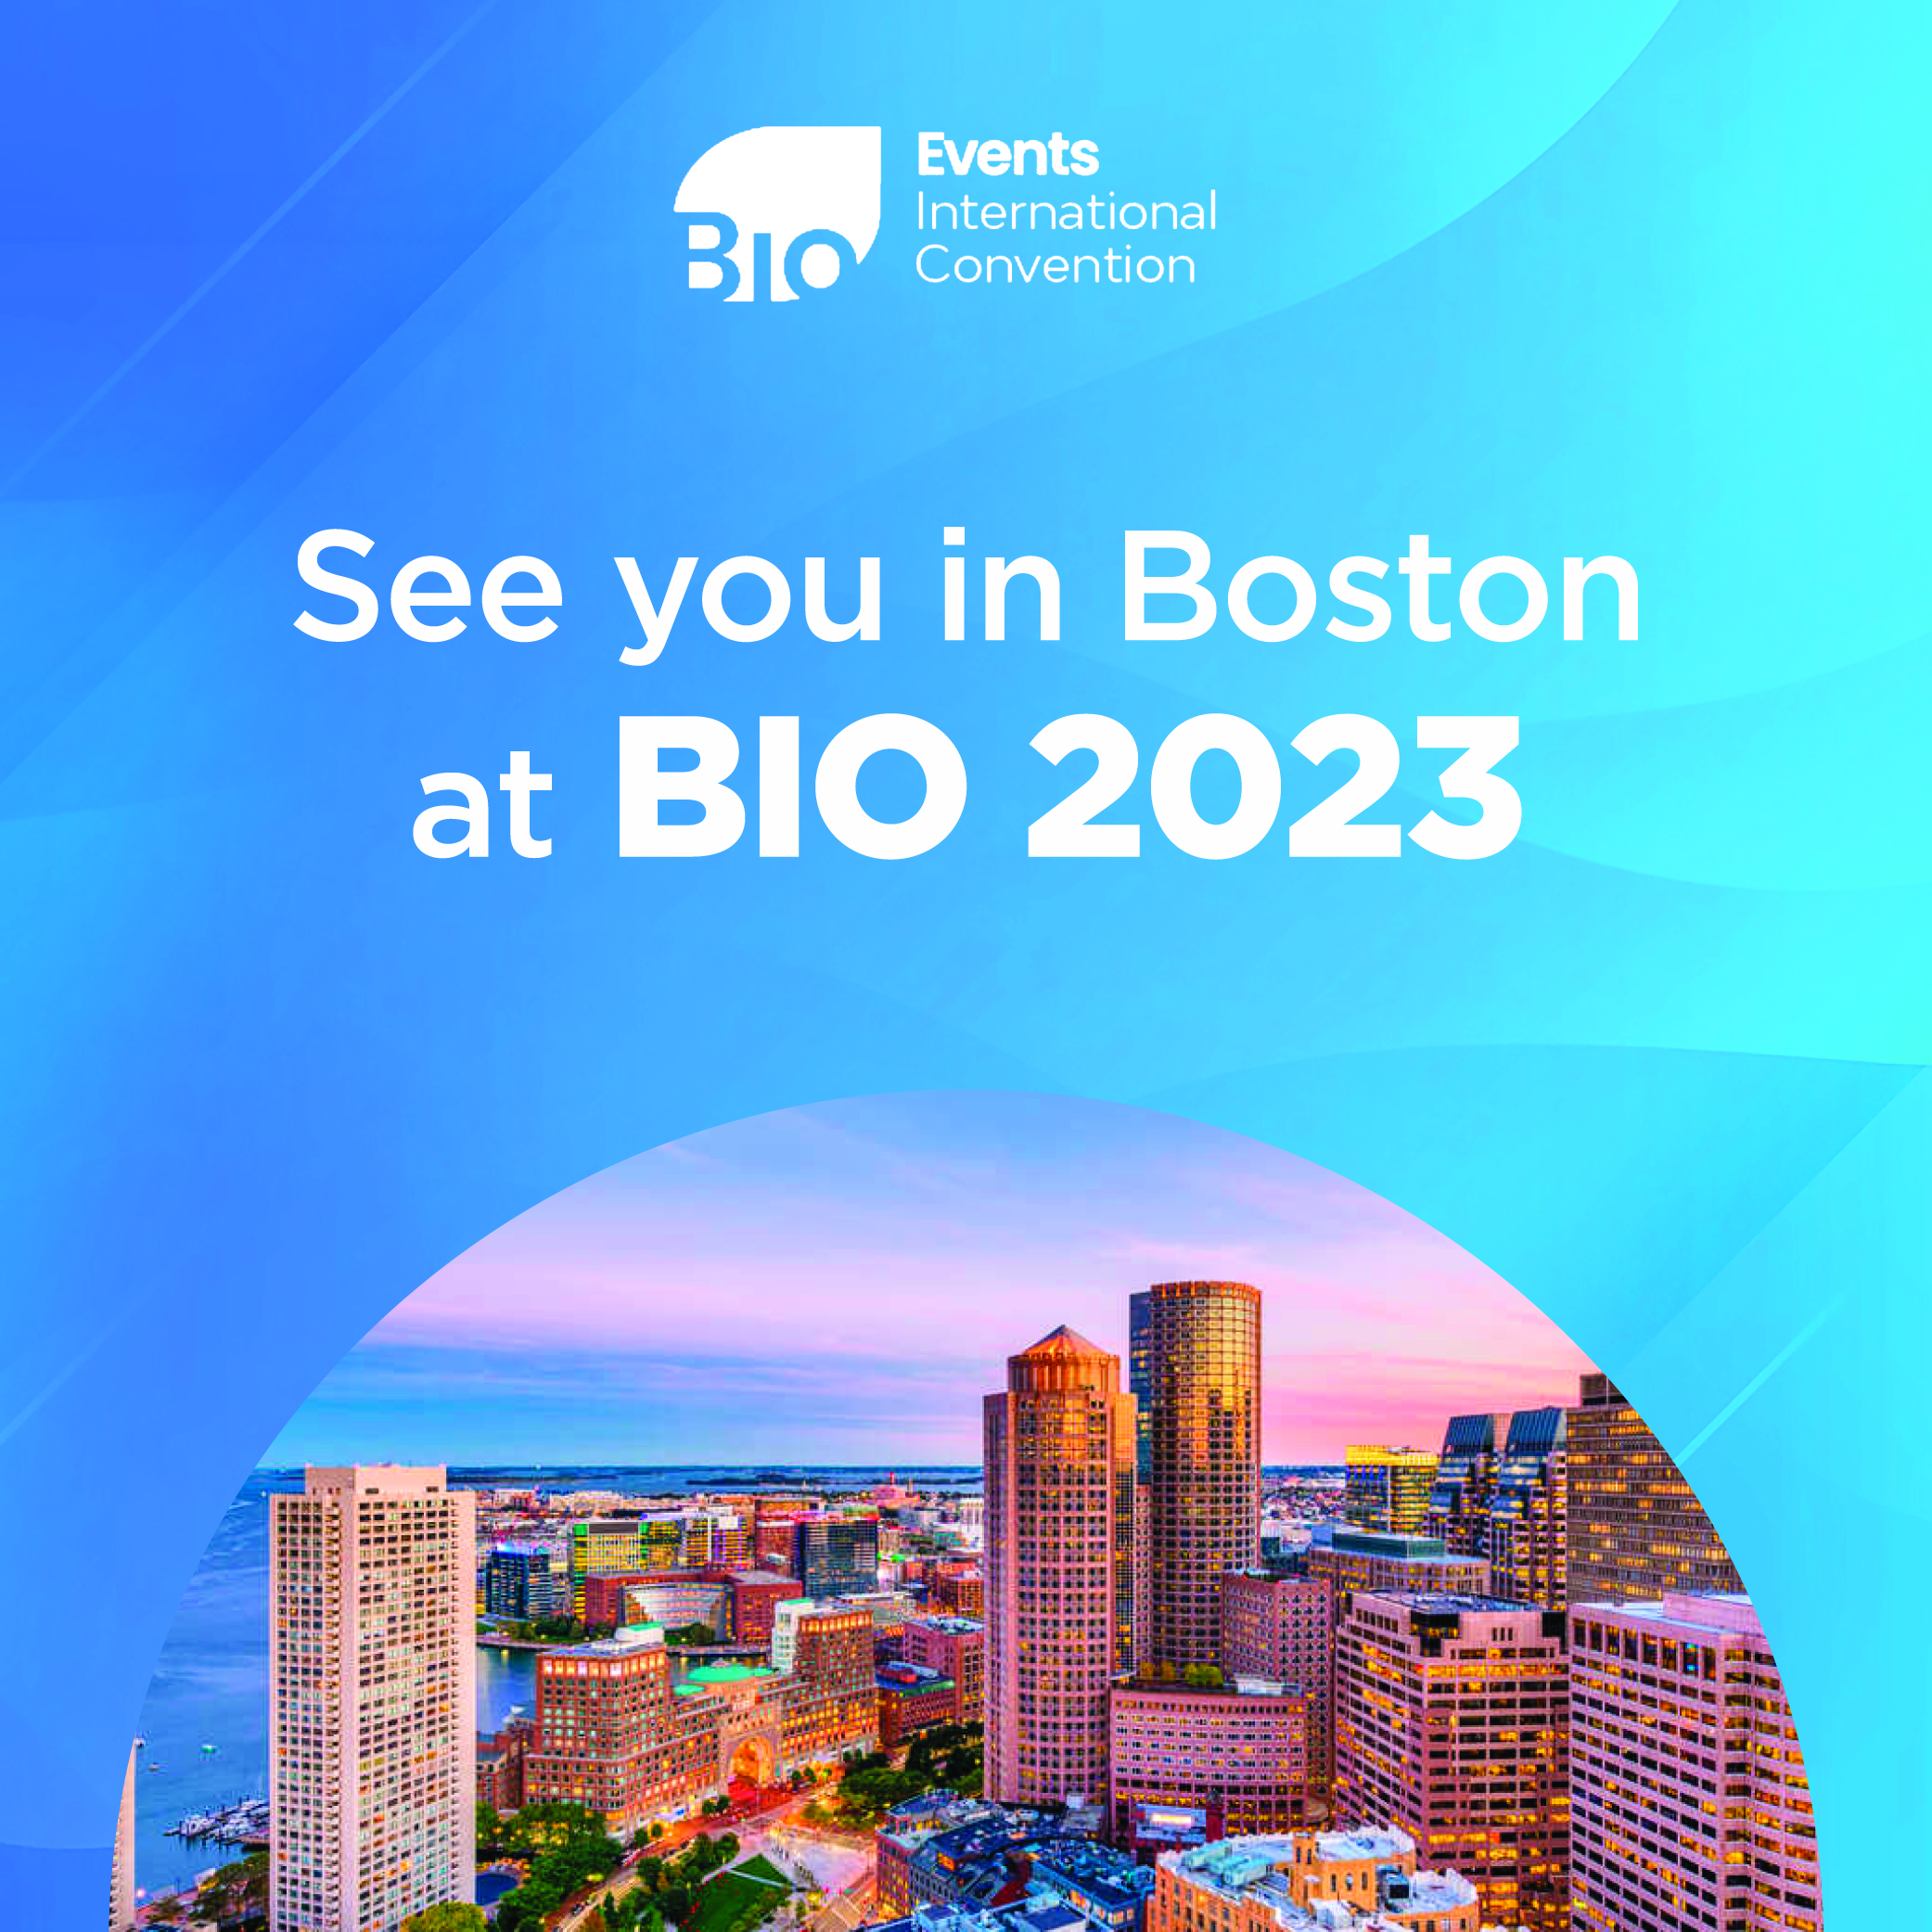 Visit Sterlitech at BIO 2023 [Booth #2779] from June 5 to 8 in Boston 